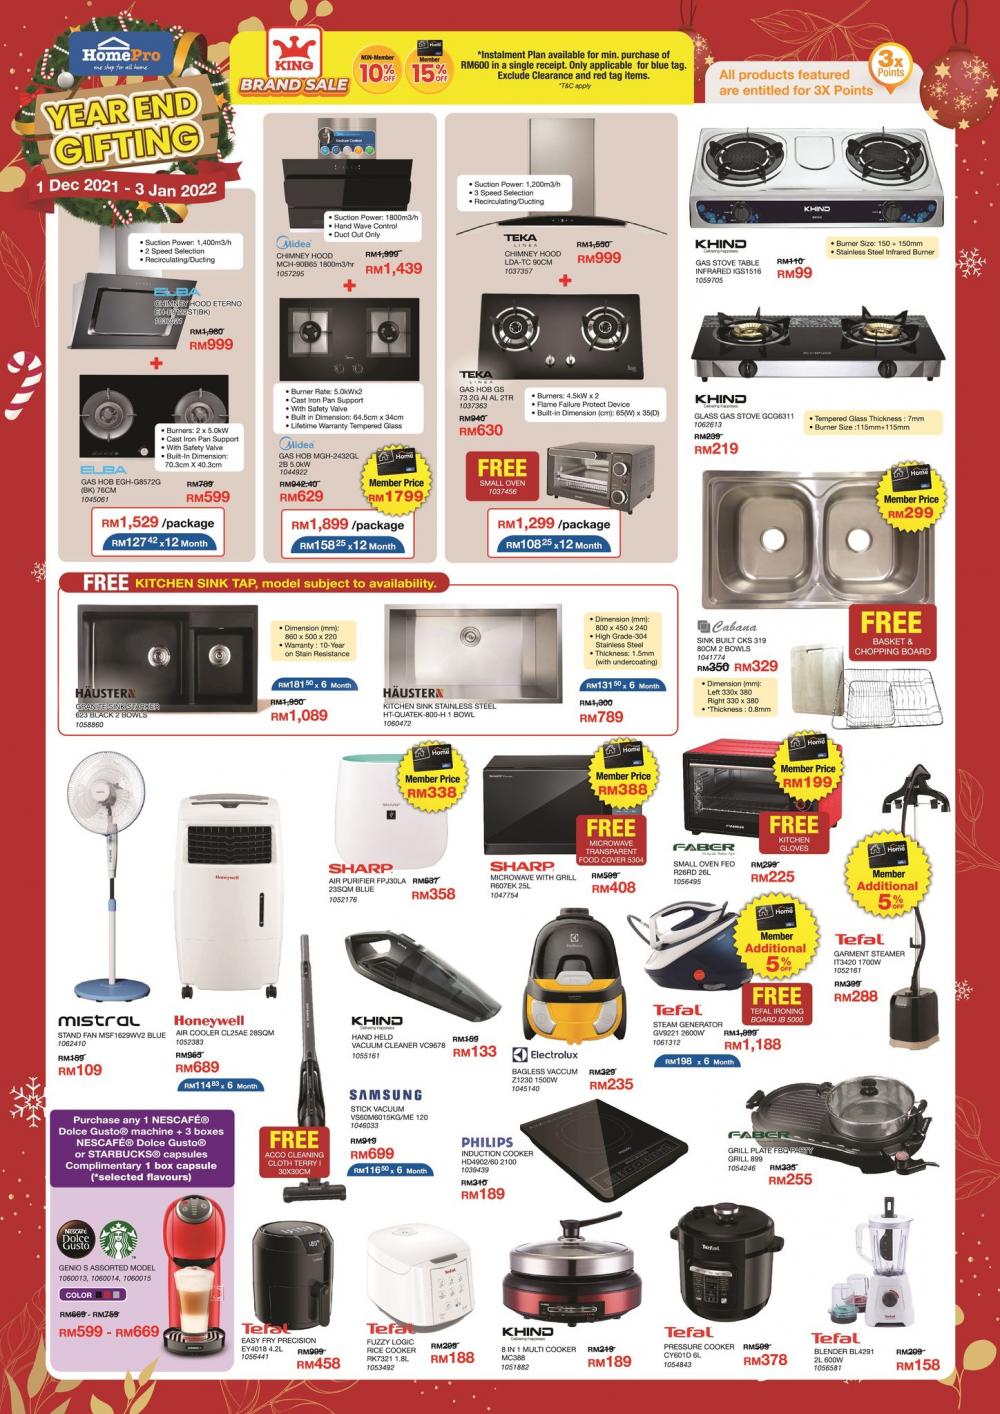 HomePro Year-End Gifting Promotion Catalogue (1 December 2021 - 3 January 2022)